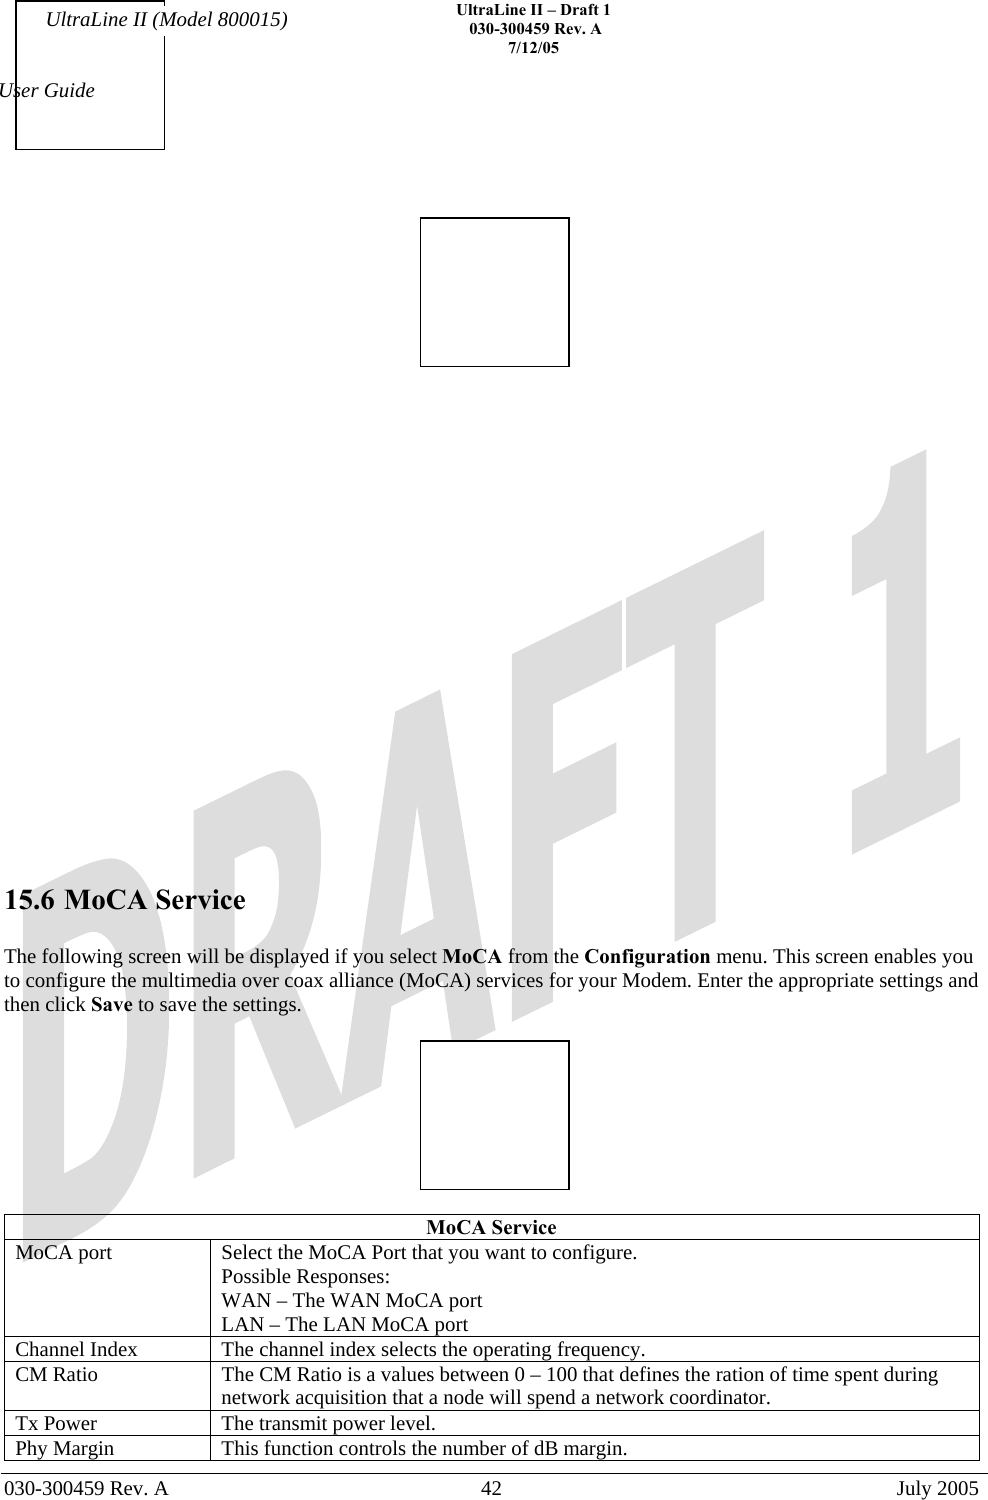    UltraLine II – Draft 1   030-300459 Rev. A 7/12/05   030-300459 Rev. A  42  July 2005  User Guide UltraLine II (Model 800015)                       15.6 MoCA Service  The following screen will be displayed if you select MoCA from the Configuration menu. This screen enables you to configure the multimedia over coax alliance (MoCA) services for your Modem. Enter the appropriate settings and then click Save to save the settings.    MoCA Service MoCA port  Select the MoCA Port that you want to configure. Possible Responses: WAN – The WAN MoCA port LAN – The LAN MoCA port Channel Index  The channel index selects the operating frequency. CM Ratio  The CM Ratio is a values between 0 – 100 that defines the ration of time spent during network acquisition that a node will spend a network coordinator. Tx Power  The transmit power level. Phy Margin  This function controls the number of dB margin. 